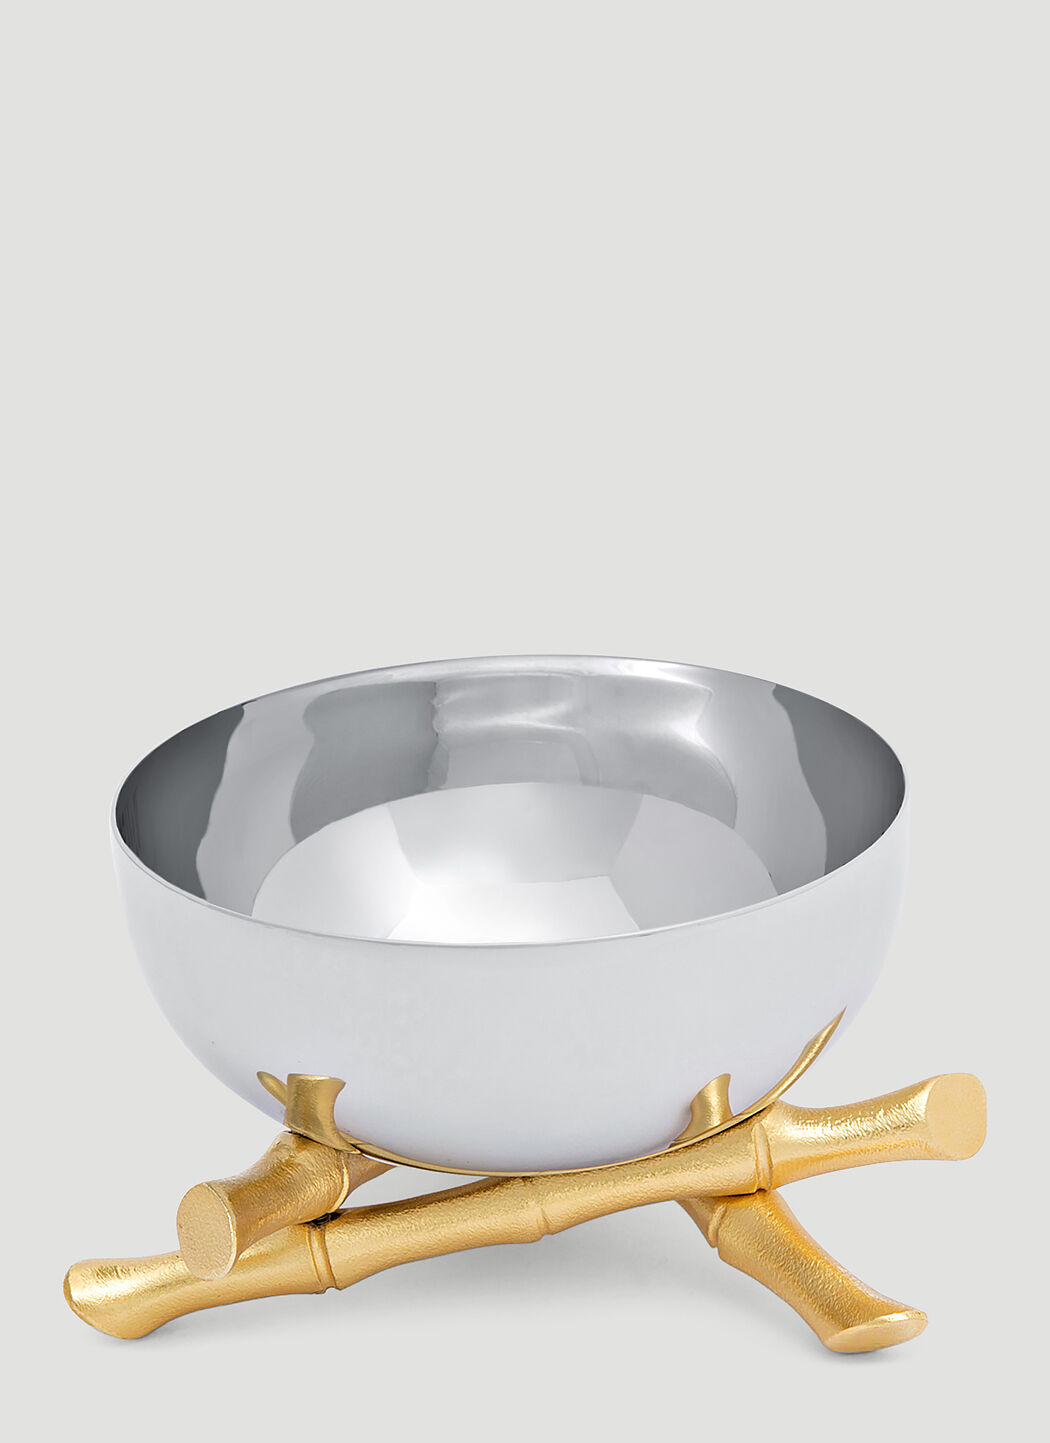 Rosenthal Small Bambou Bowl Gold wps0691114